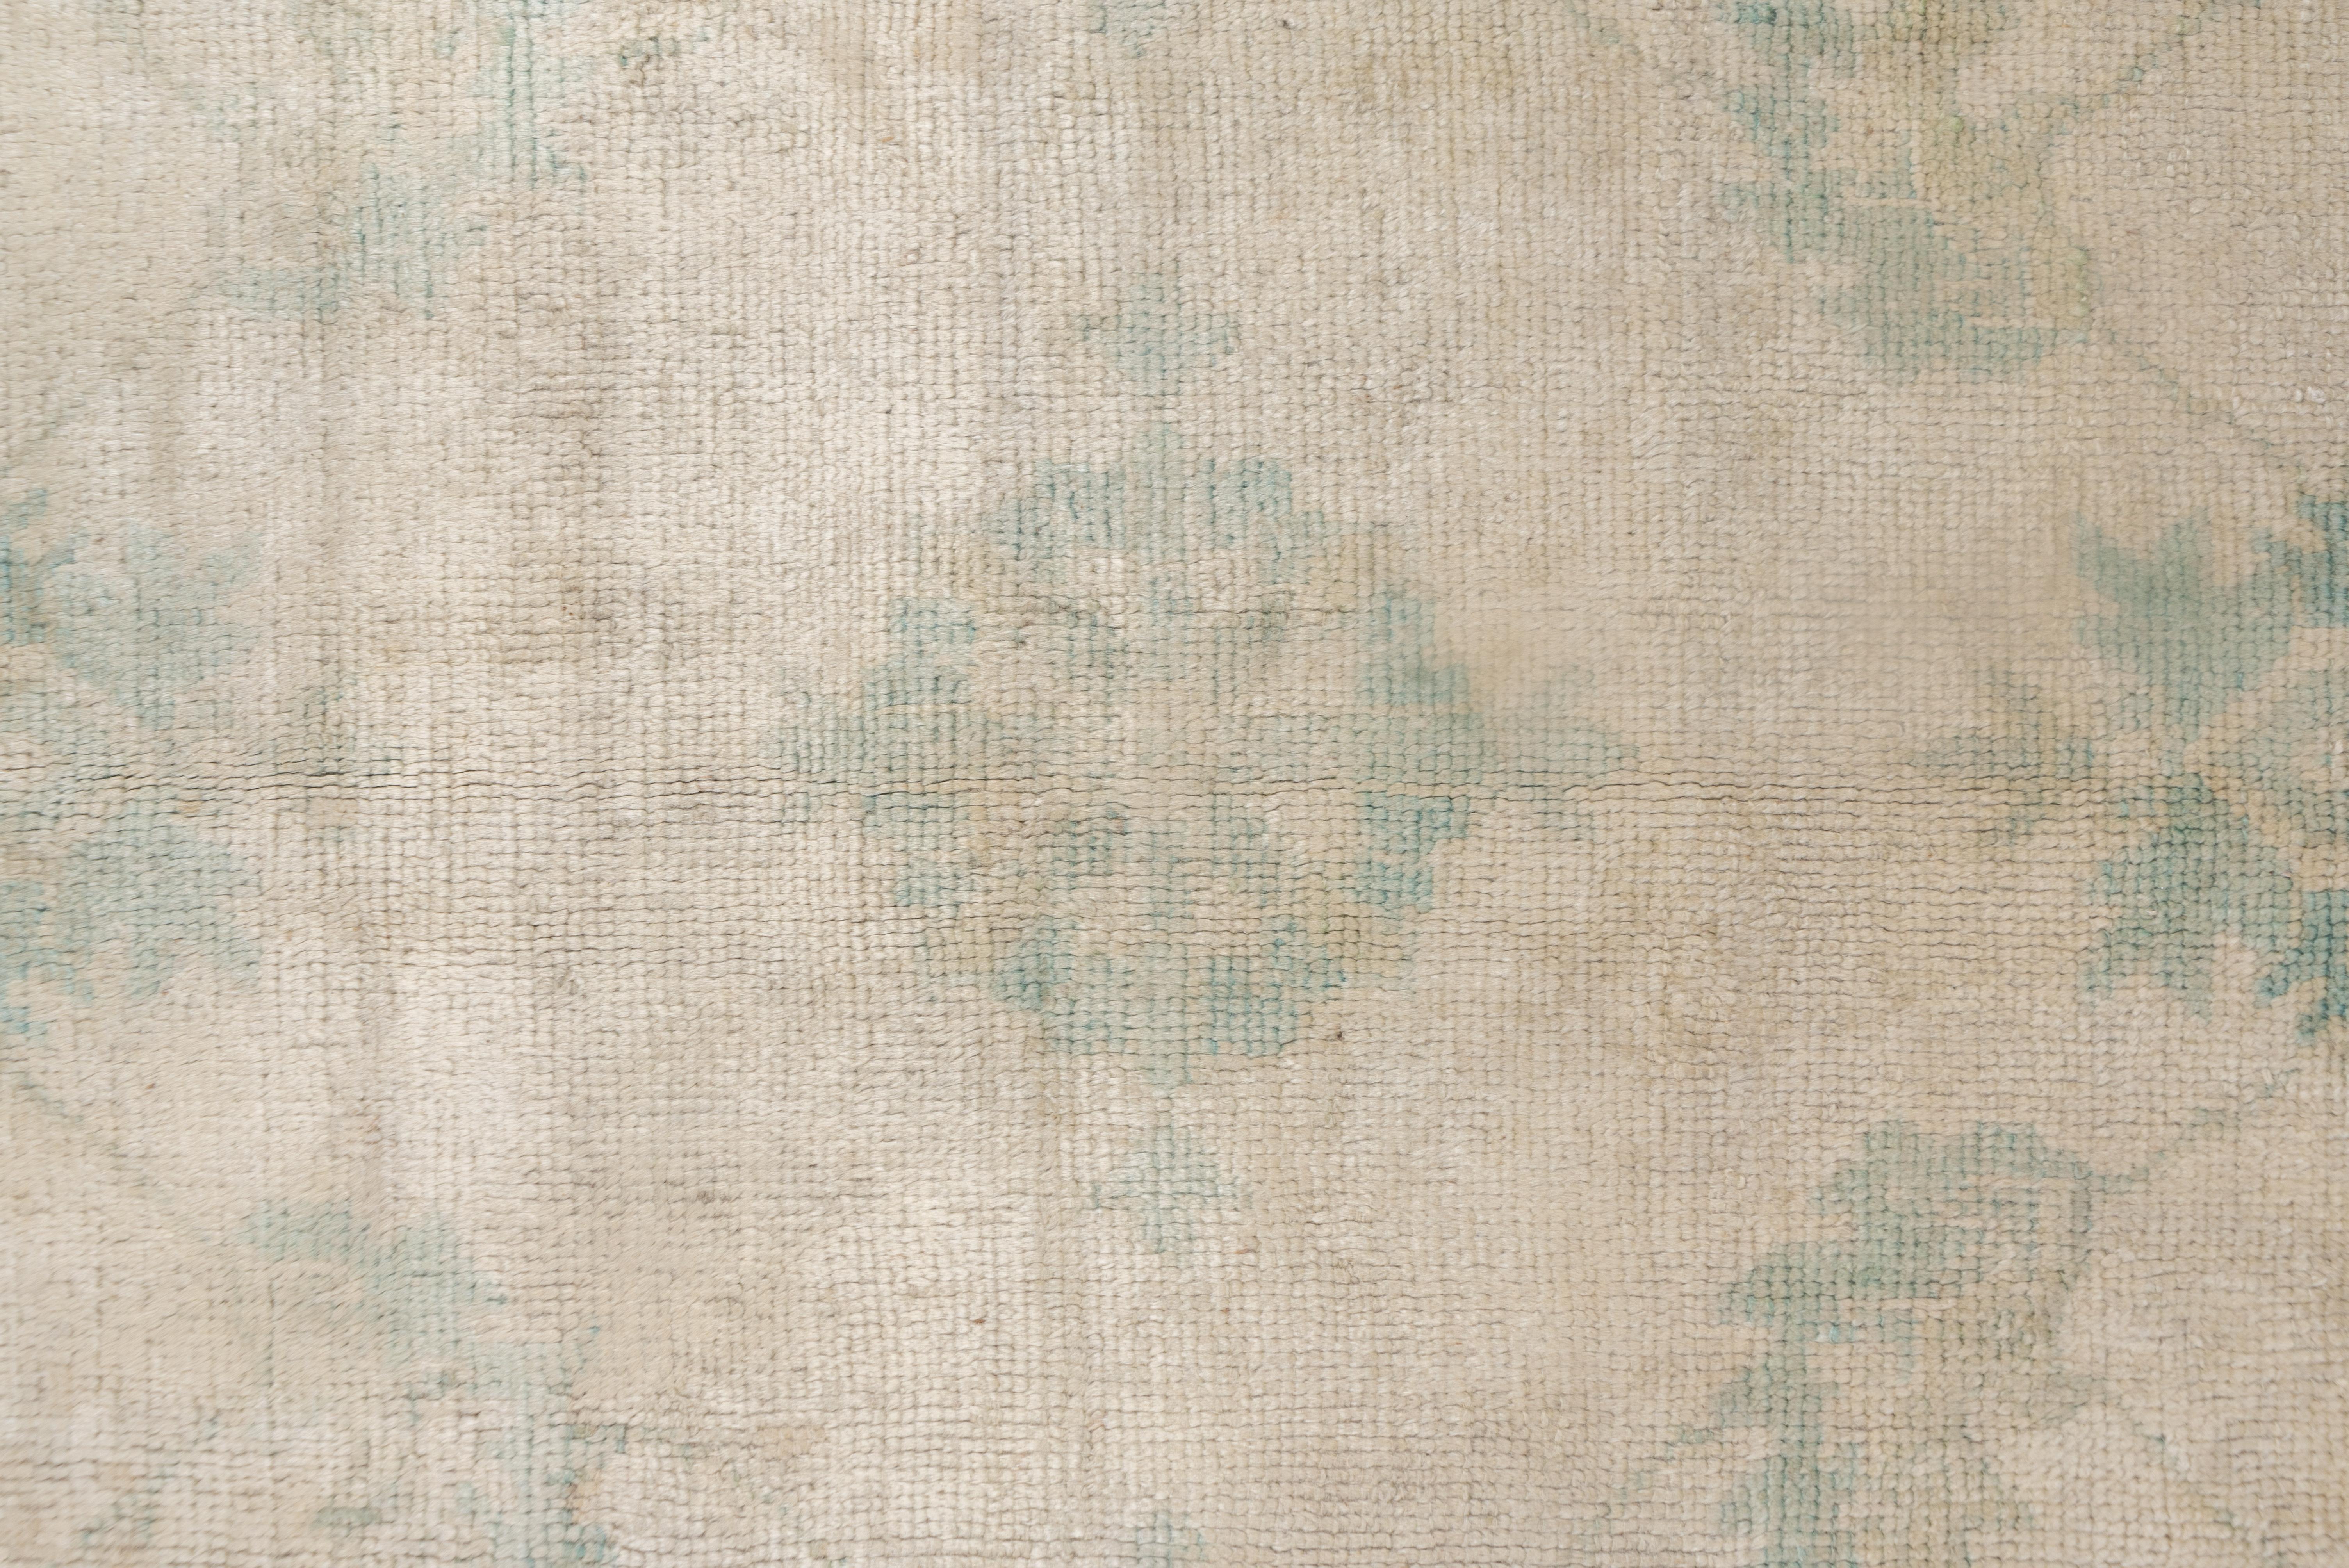 Antique Oushak Carpet, Ivory Field, Turquoise Borders In Good Condition For Sale In New York, NY